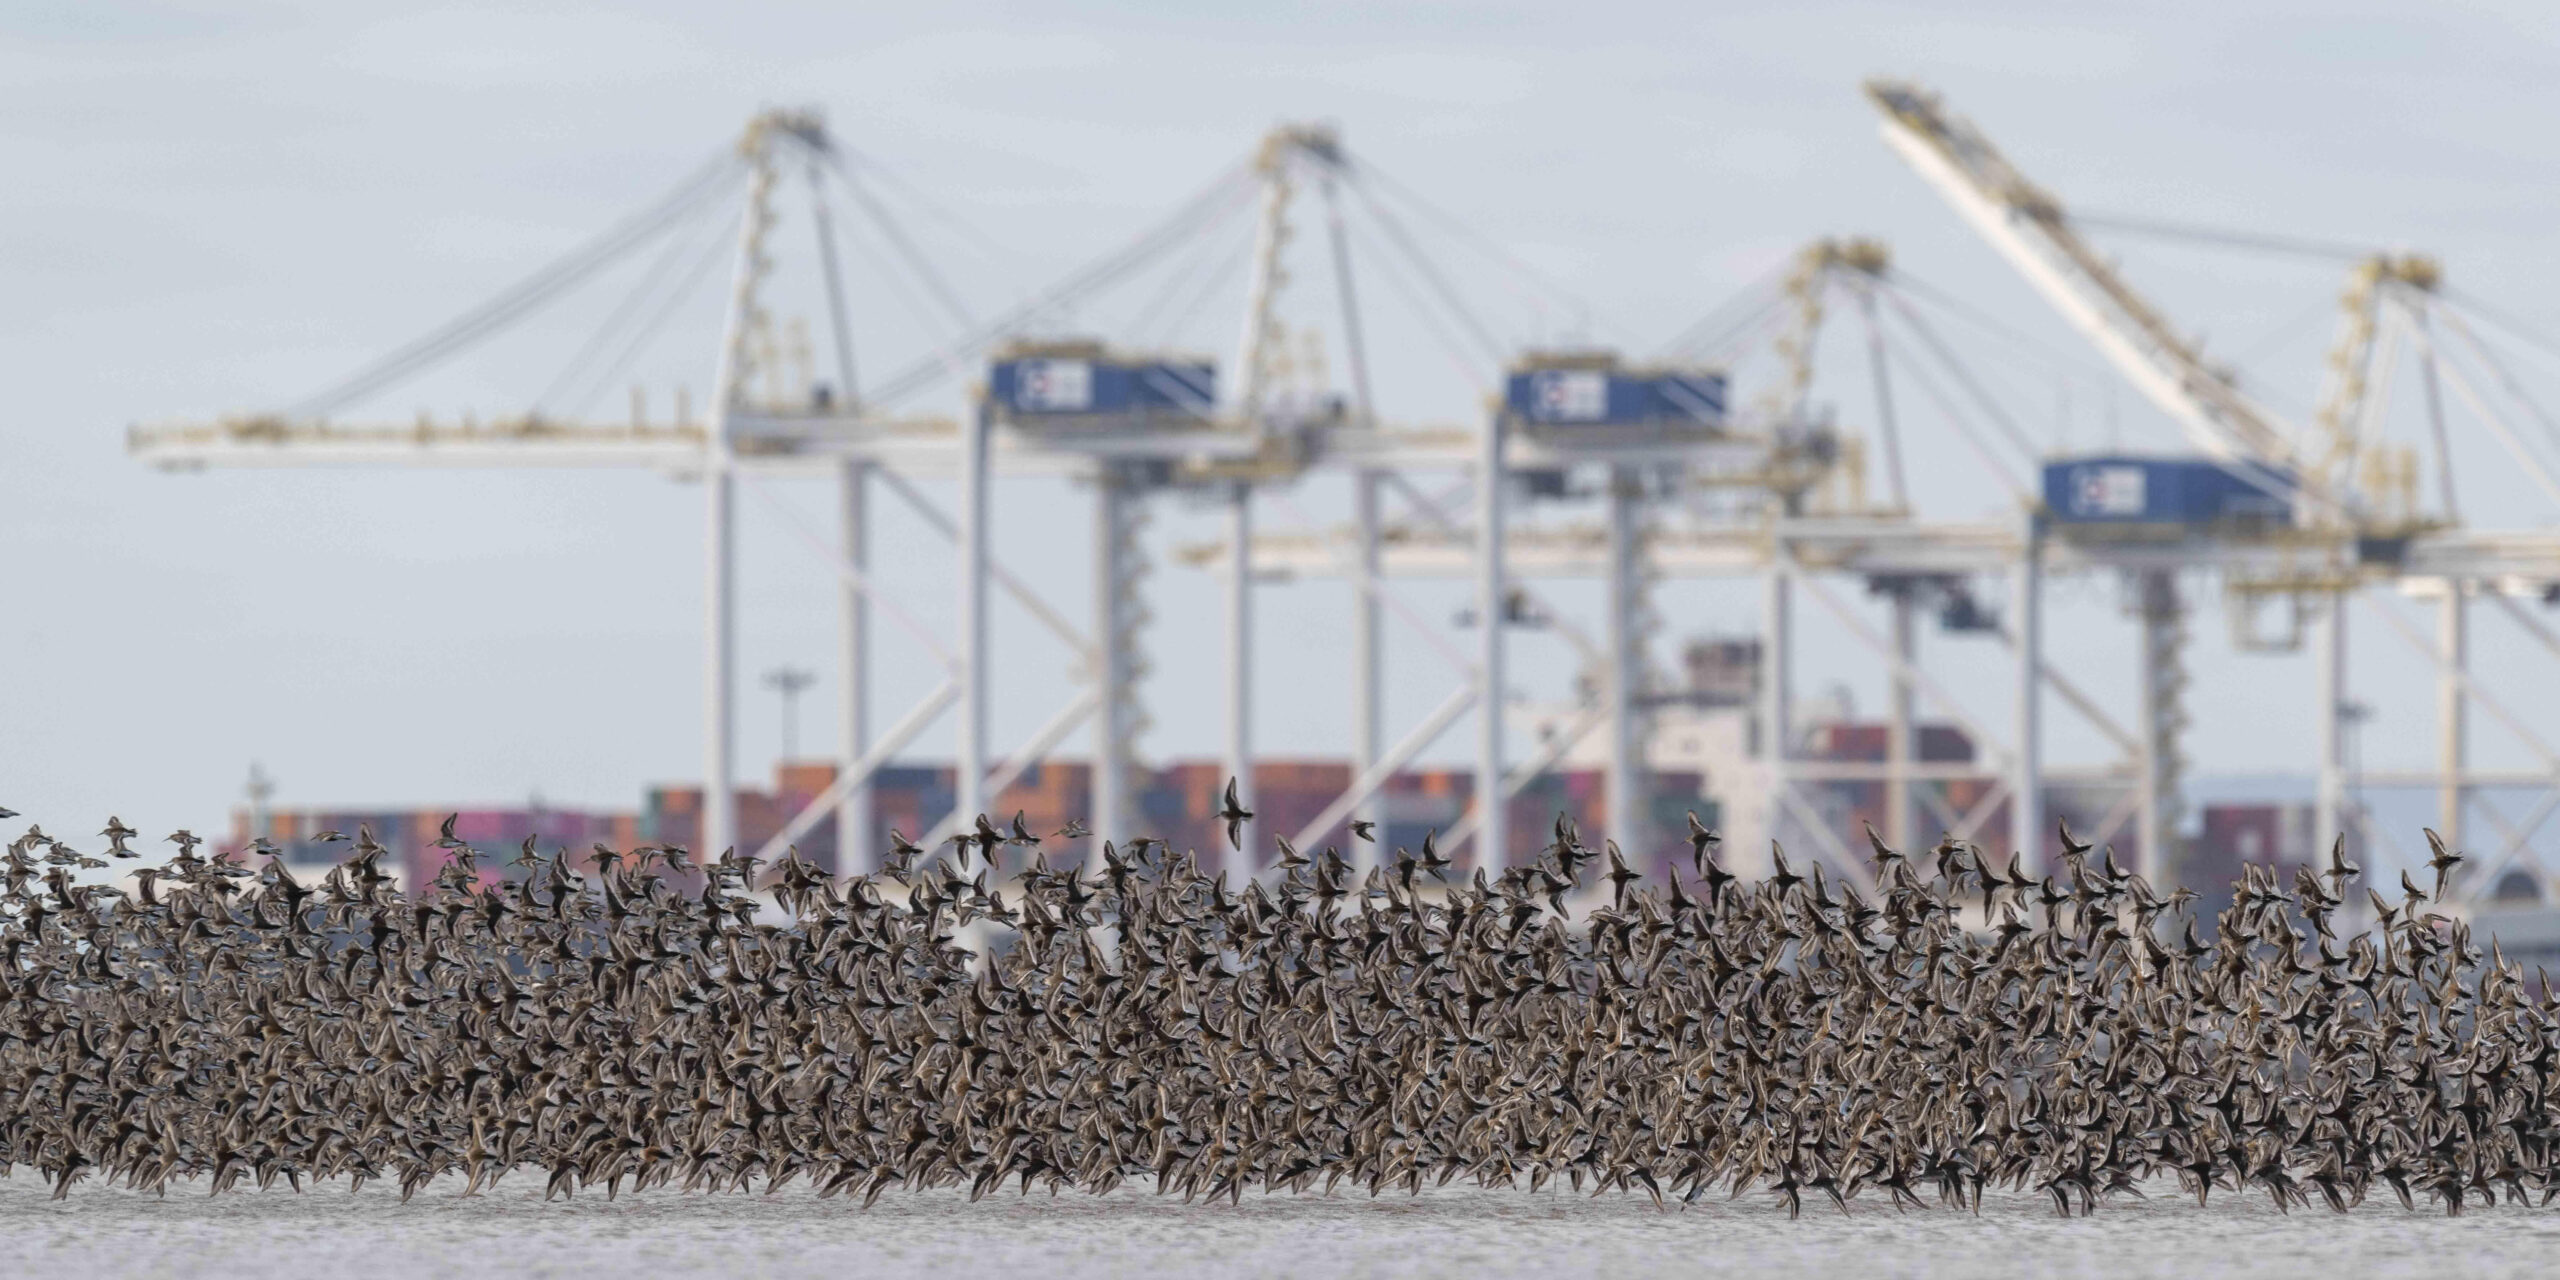 Flock of birds in front of the Roberts Bank Terminal